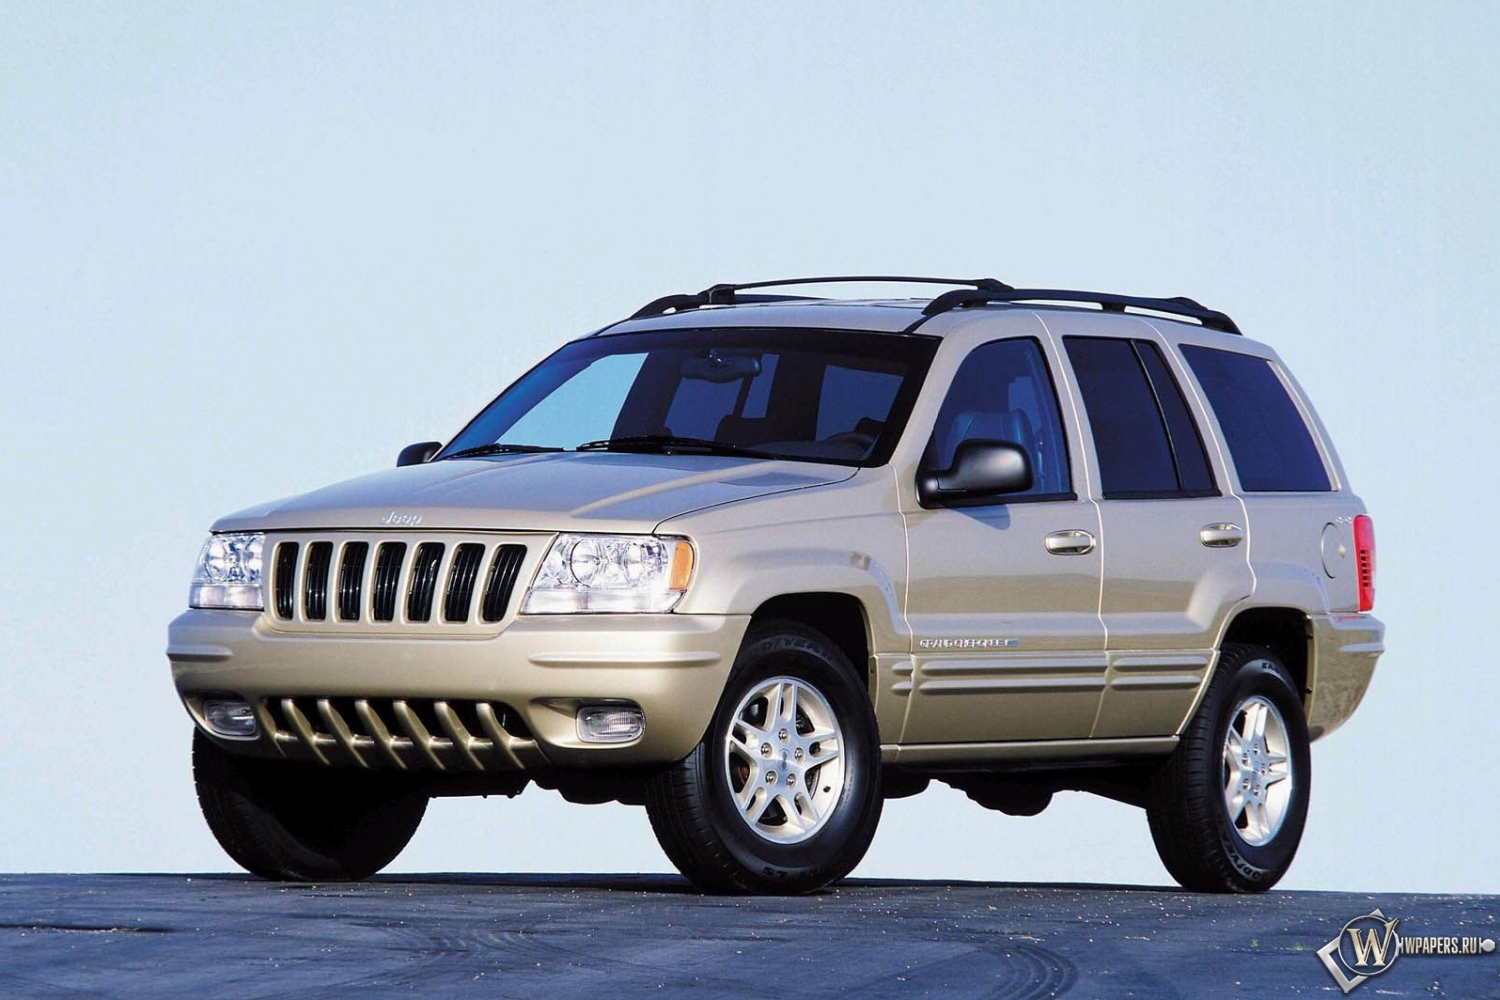 1992 Jeep grand cherokee review